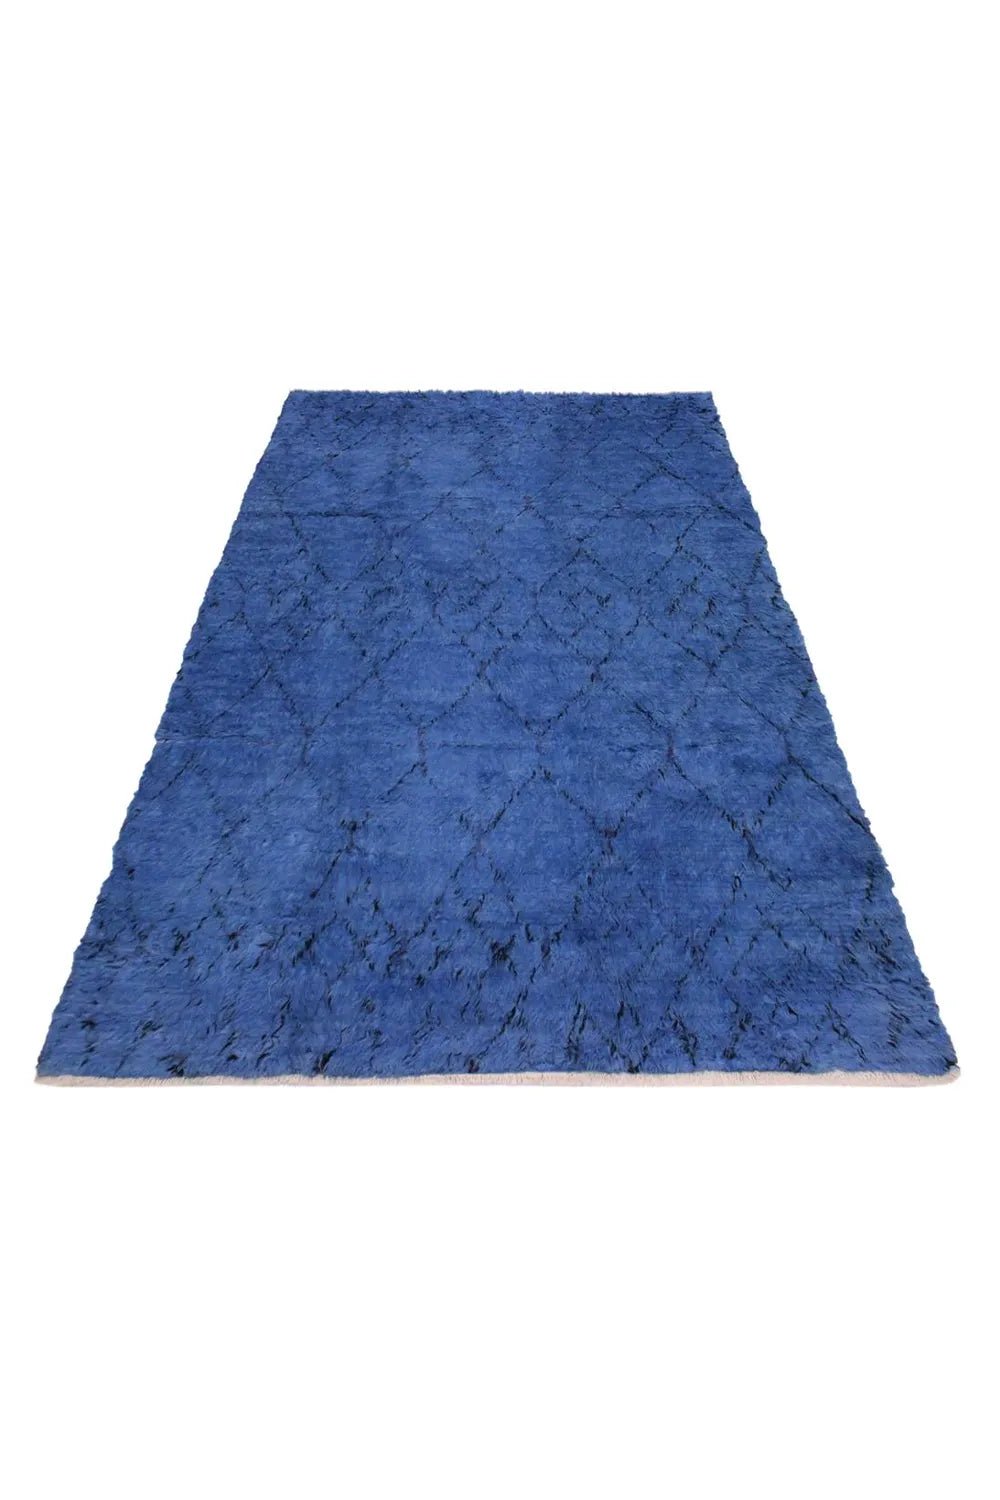 Modern Hand-Knotted Blue Wool Rug with Geometric Patterns in 8x10 Size